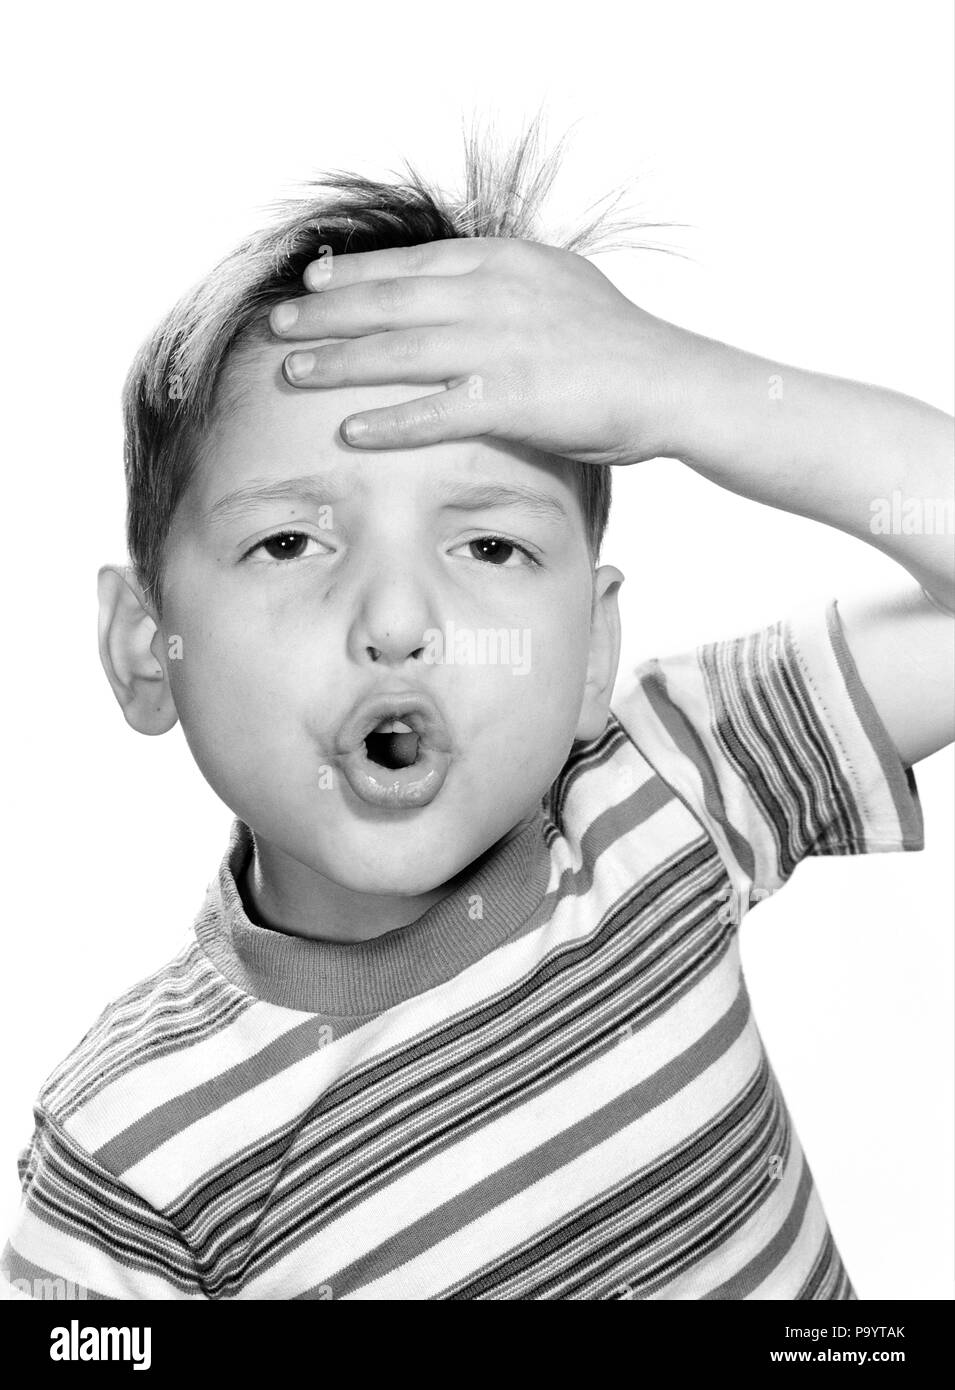 1960s SURPRISED ALARMED BOY WEARING STRIPED T-SHIRT LOOKING AT CAMERA SMACKING FOREHEAD WITH HAND  - j11762 DEB001 HARS EXPRESSIONS B&W HITTING EYE CONTACT WEIRD HEAD AND SHOULDERS DISCOVERY DISTRESSED OVERWHELMED EXCITEMENT ZANY UNCONVENTIONAL BOTHERED DEB001 IDIOSYNCRATIC T-SHIRT AMUSING ASTONISHED ECCENTRIC EMOTION EMOTIONAL EMOTIONS JUVENILES SMACKING ALARMED ASTONISHMENT BLACK AND WHITE CAUCASIAN ETHNICITY ERRATIC OLD FASHIONED Stock Photo